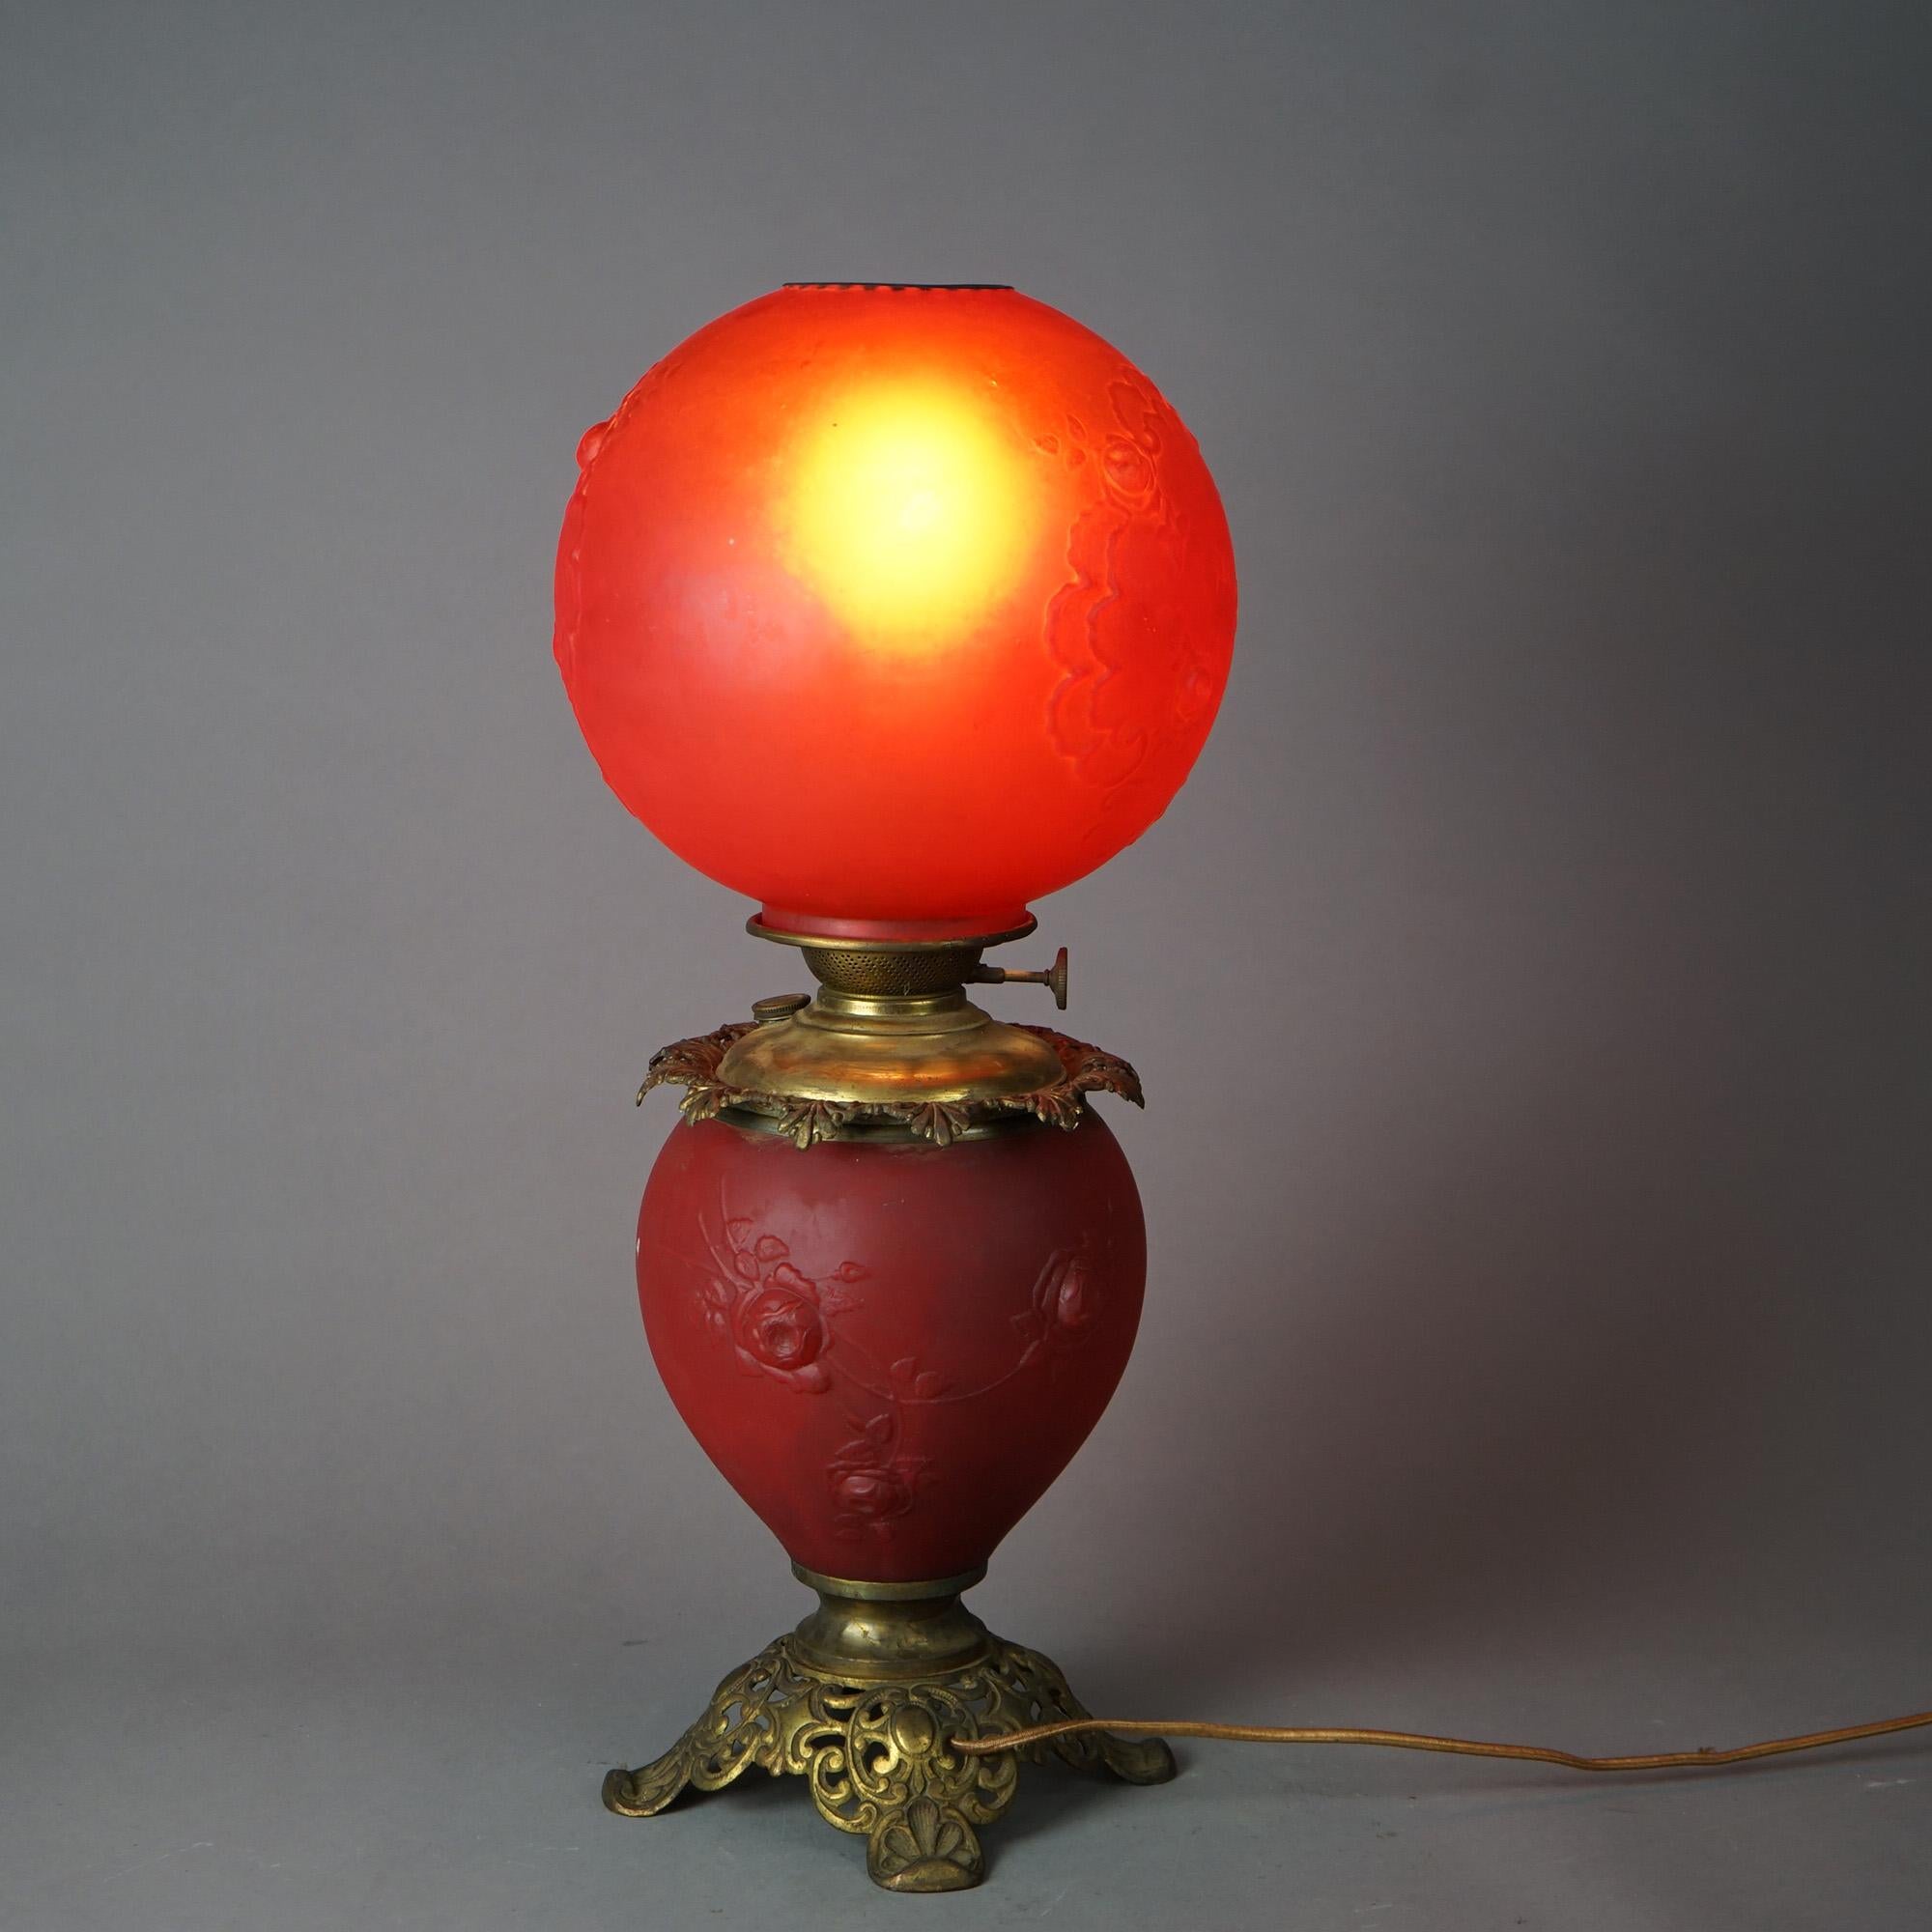 Antique Brass & Cranberry Glass Gone With The Wind Floral Embossed Lamp c1890 For Sale 9